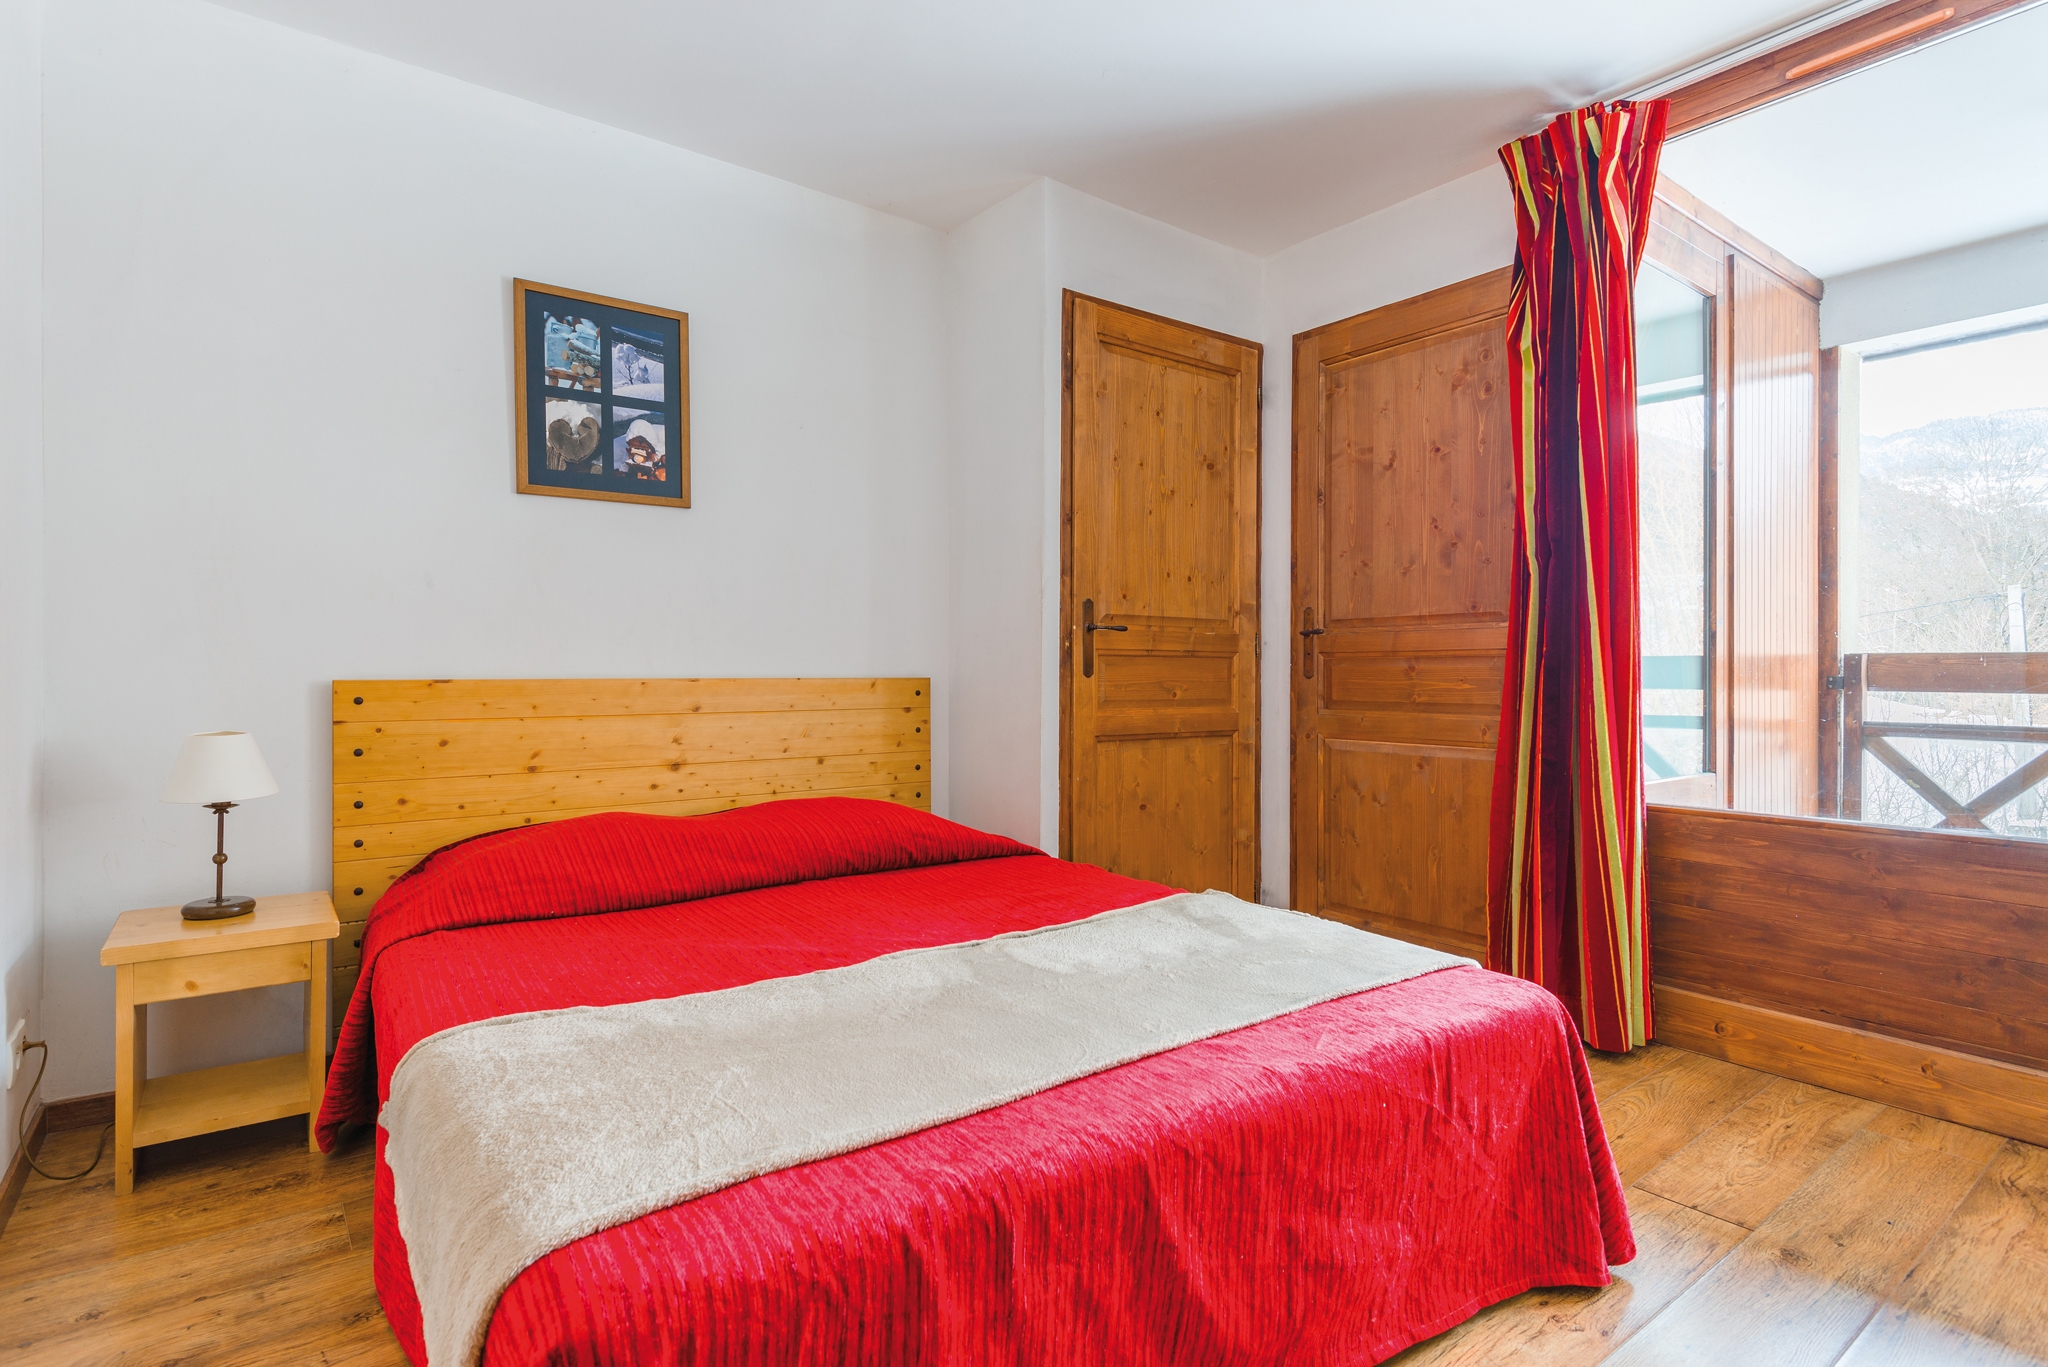 Residence Cybele in Brides les Bains: Schlafzimmer (Beispiel)